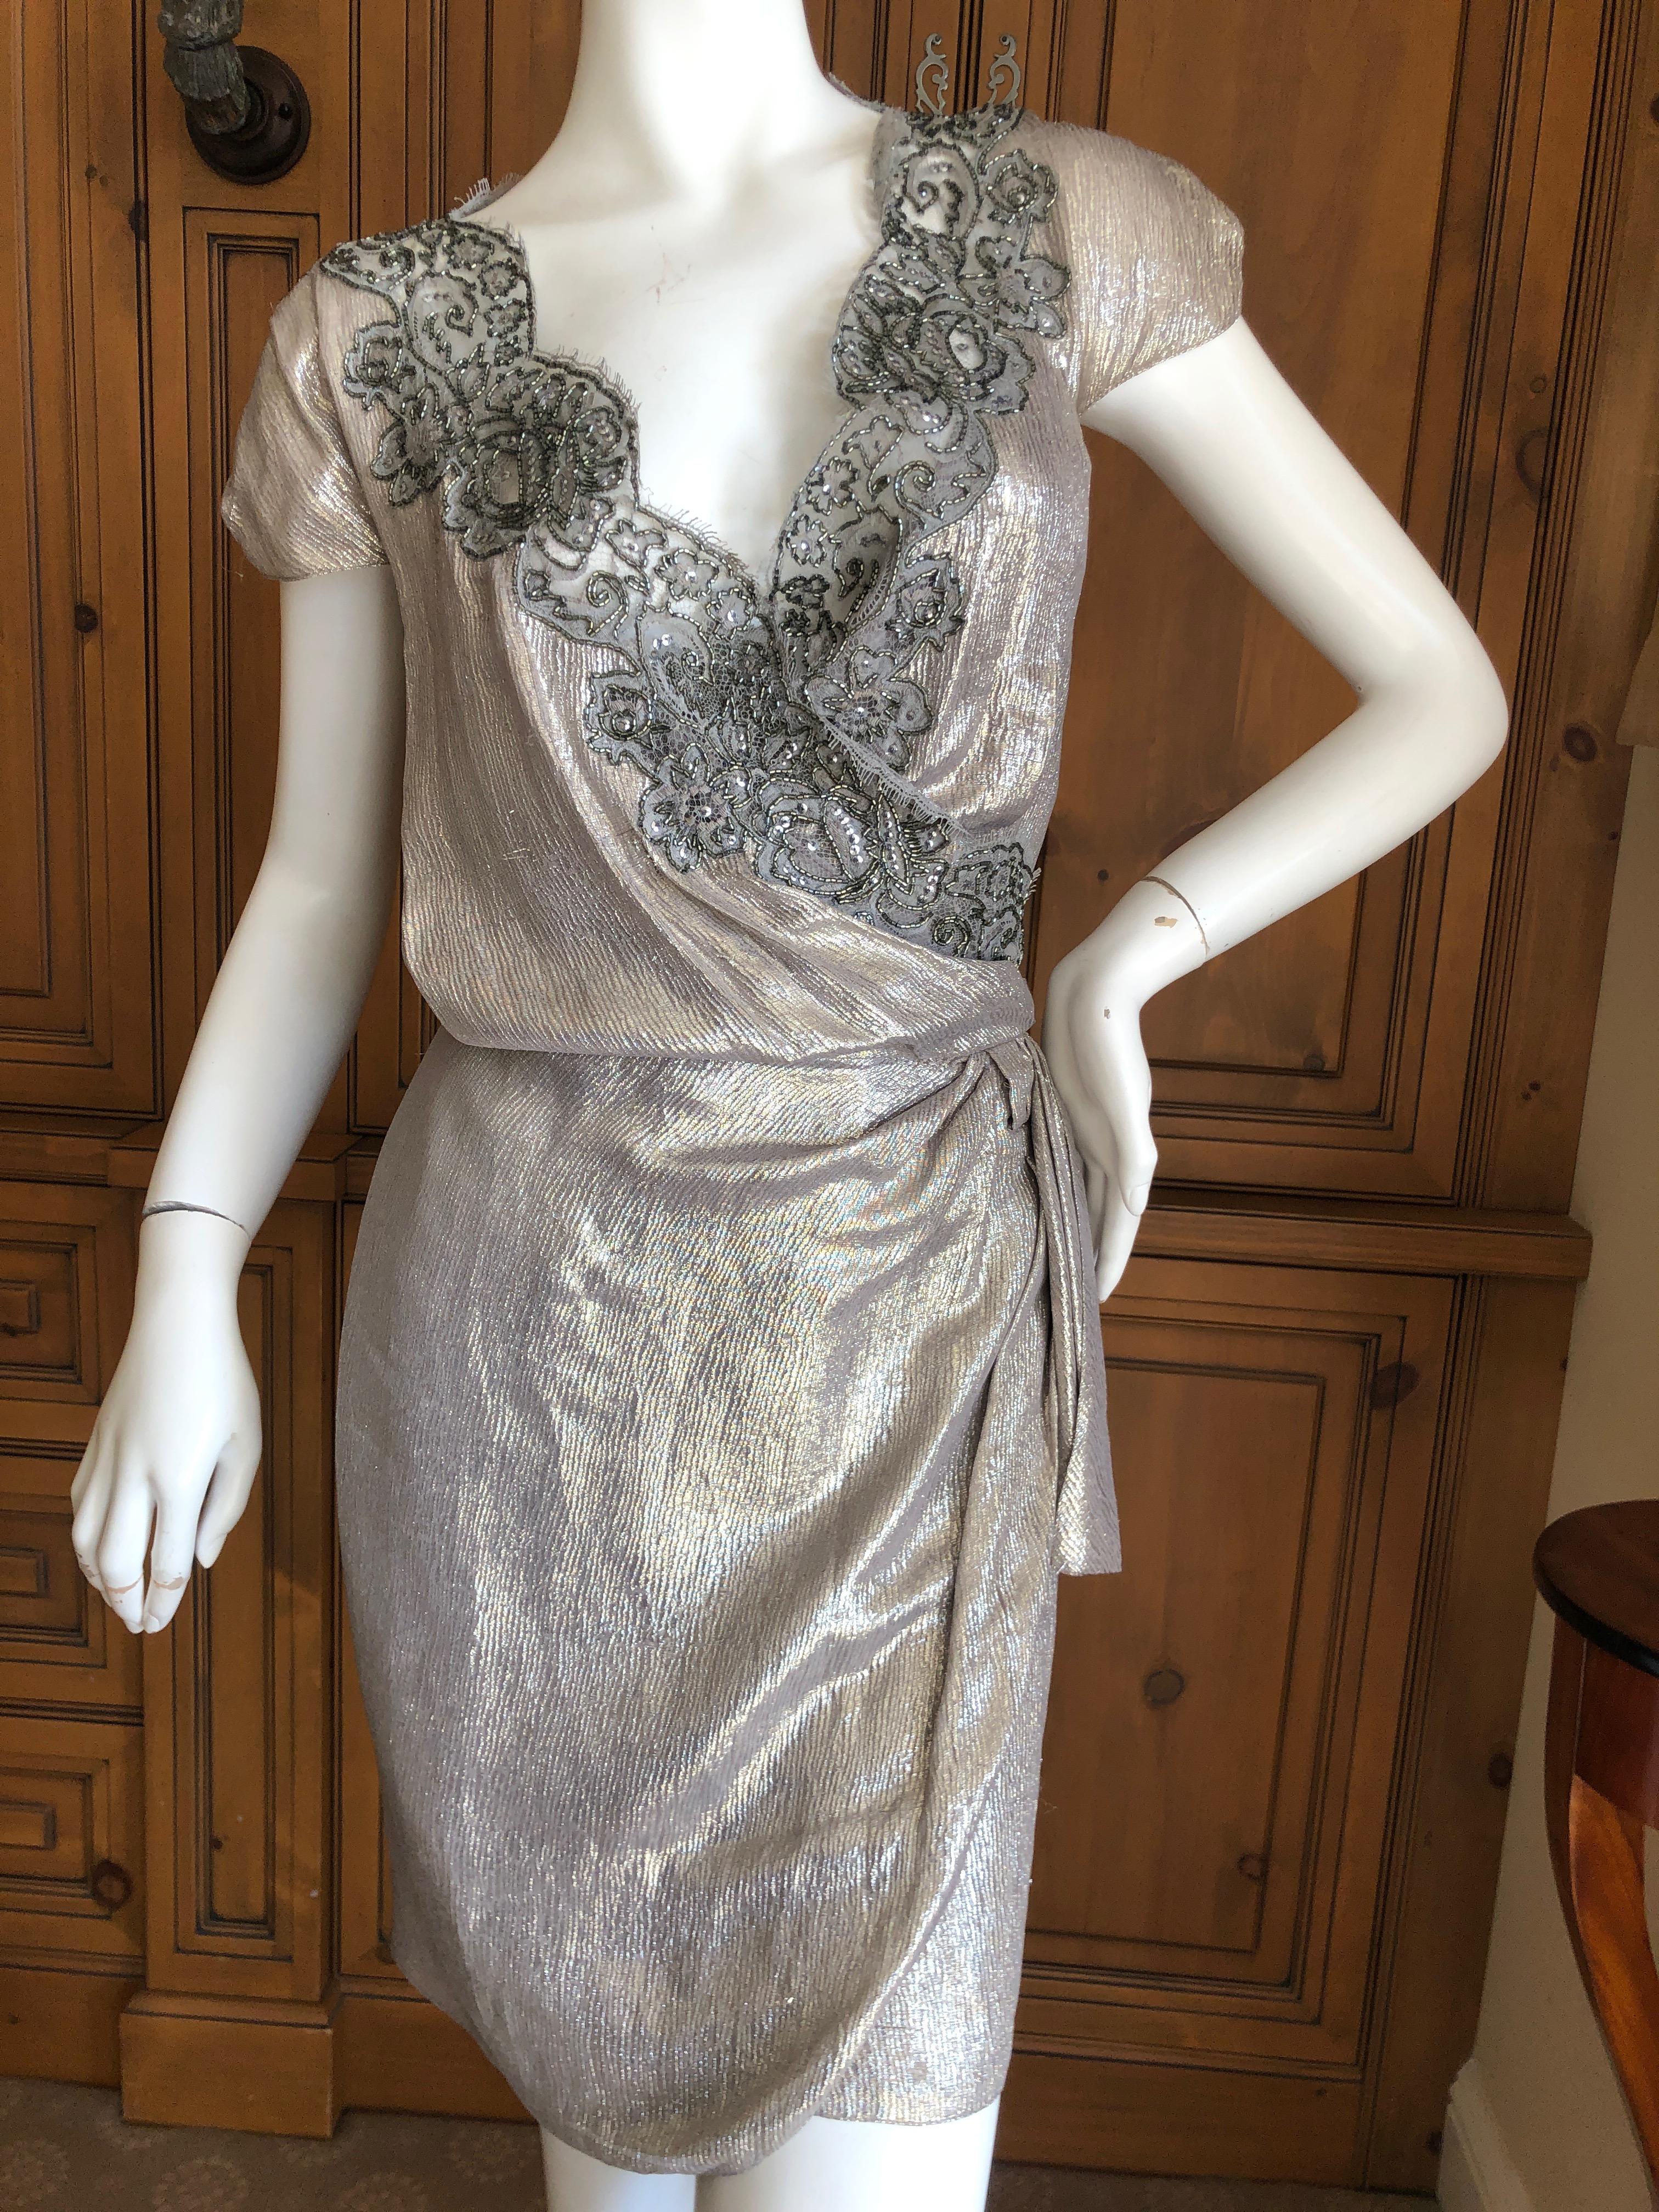  Christian Dior by Gianfranco Ferre Bead Embellished Metallic Wrap Dress 
This is so pretty, please use the zoom to see the details.
There are both silver and gold threads in the fabric
Size 40
 Bust 38